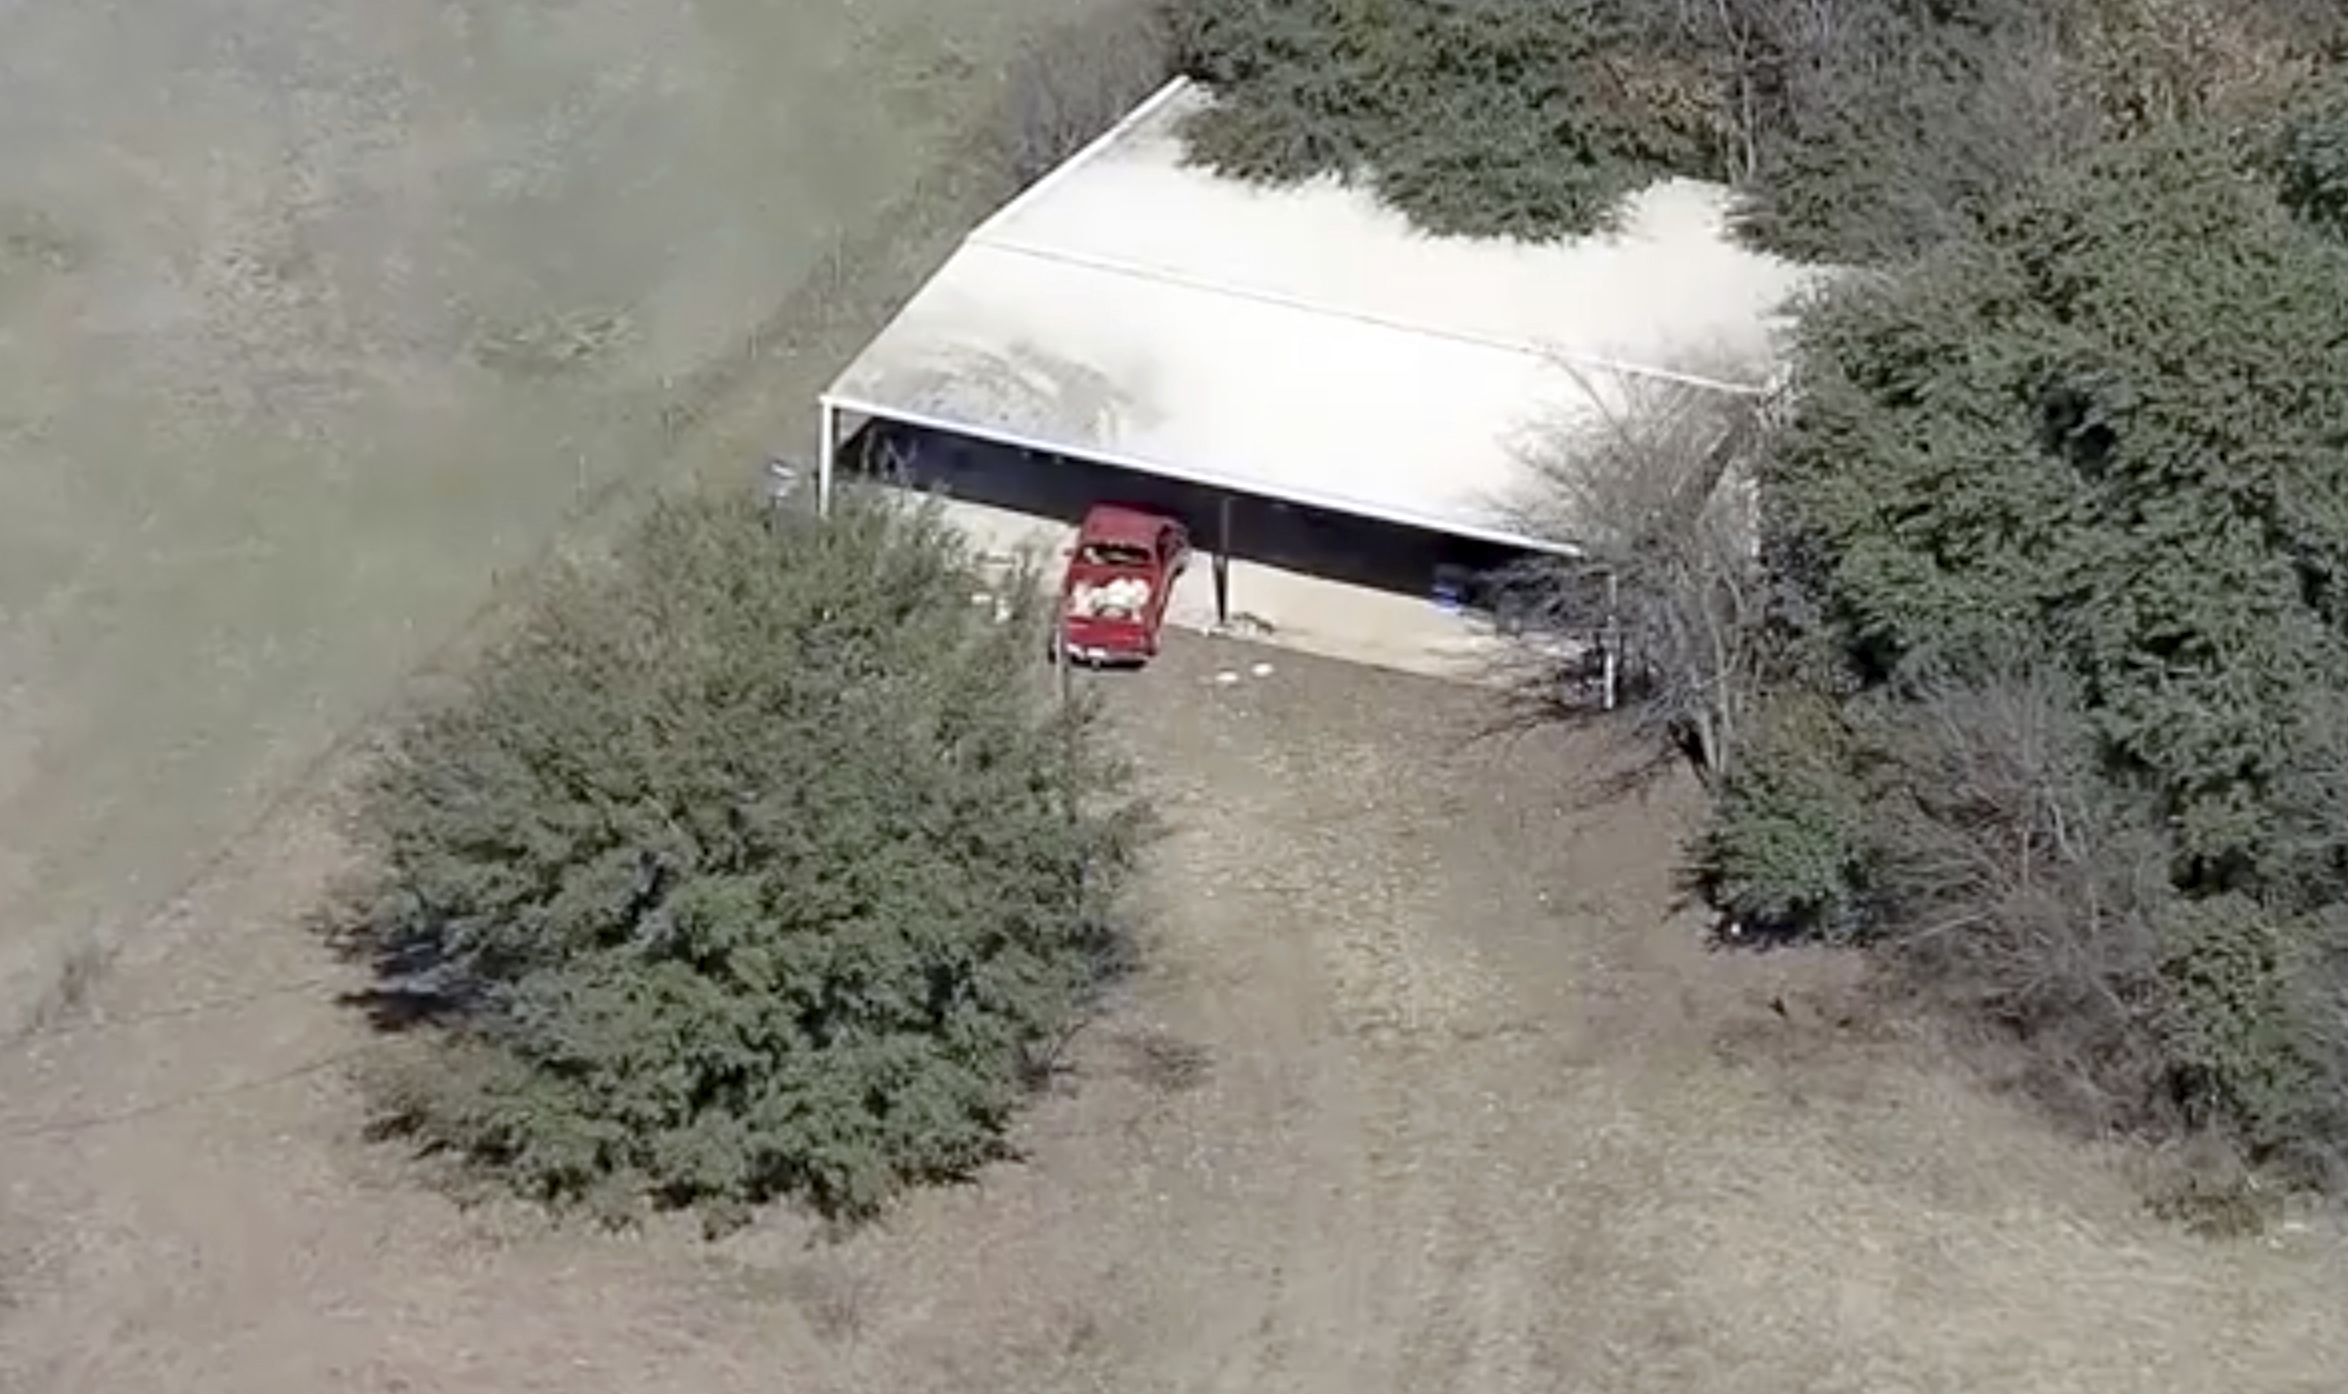 This aerial image provided by KDFW-FOX4 News shows part of the property where deputies found two young, malnourished children locked together in a dog cage near Rhome, Texas about 20 miles (32 kilometers) northwest of Fort Worth. A Texas sheriff says, Tuesday, Feb. 12, 2019, deputies responding to a domestic disturbance at a home discovered two young, malnourished children locked together in a dog cage while two others also were found malnourished. (AP)